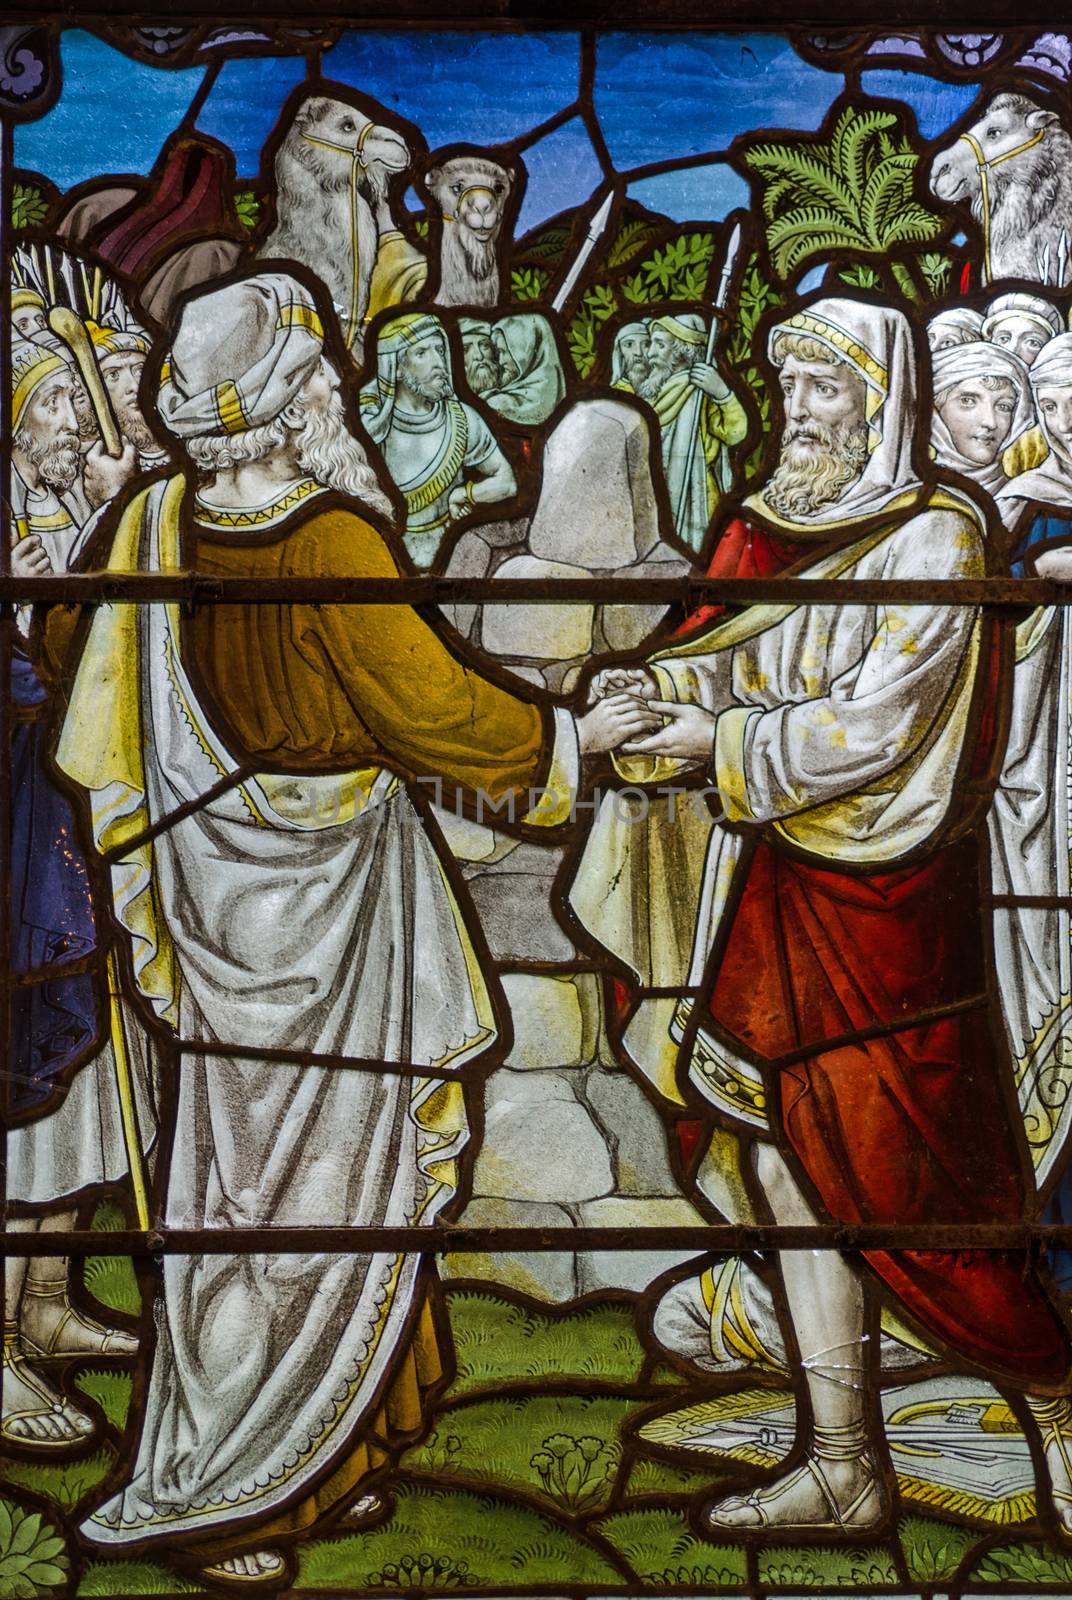 A Victorian stained glass window showing two men making an emotional agreement or Mizpah as described in the Old Testament parable of Jacob and Laban. Historic window on public display over 100 years.